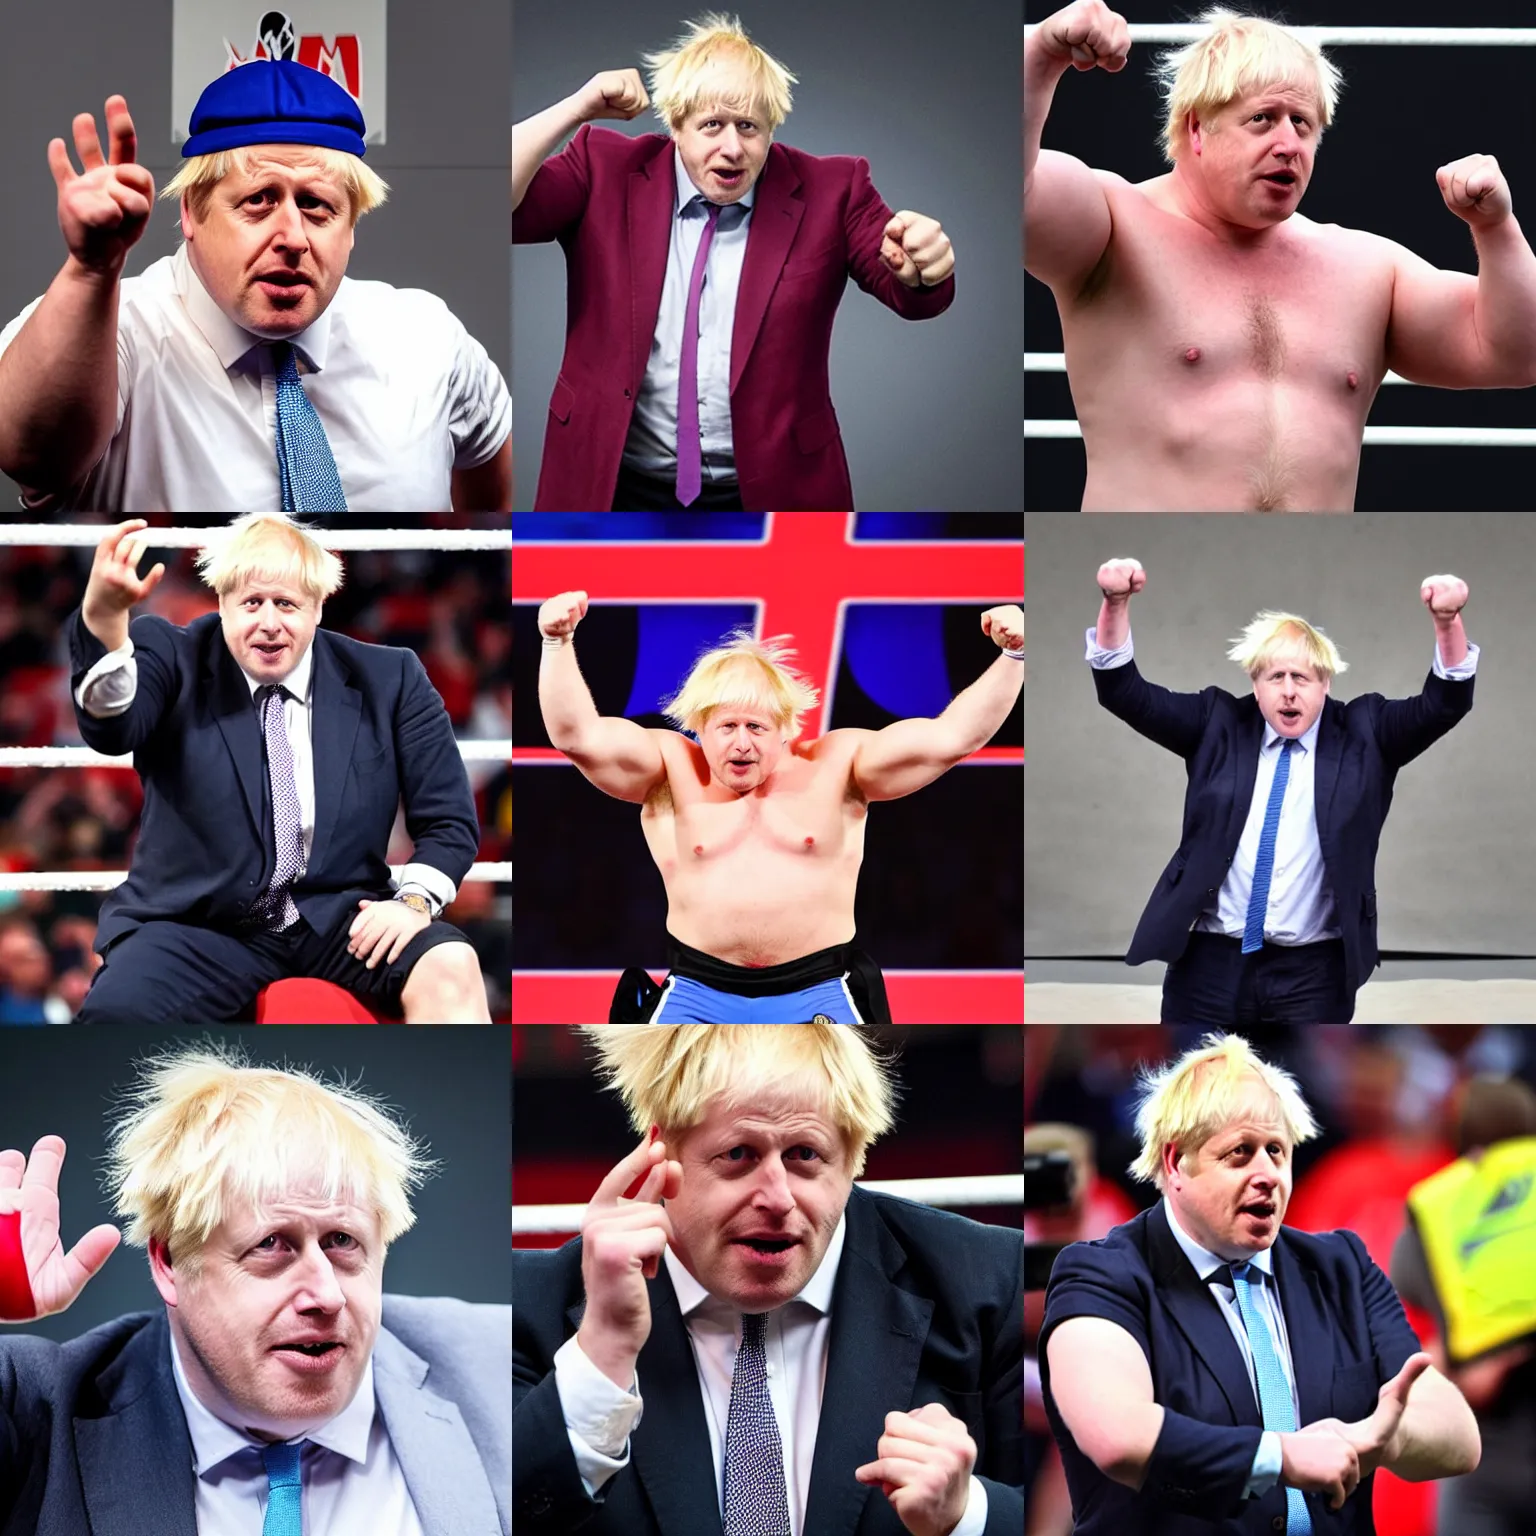 Prompt: boris johnson as an angry muscular wwe wrestler wearing a cap hat. he is staring closely at his open palm